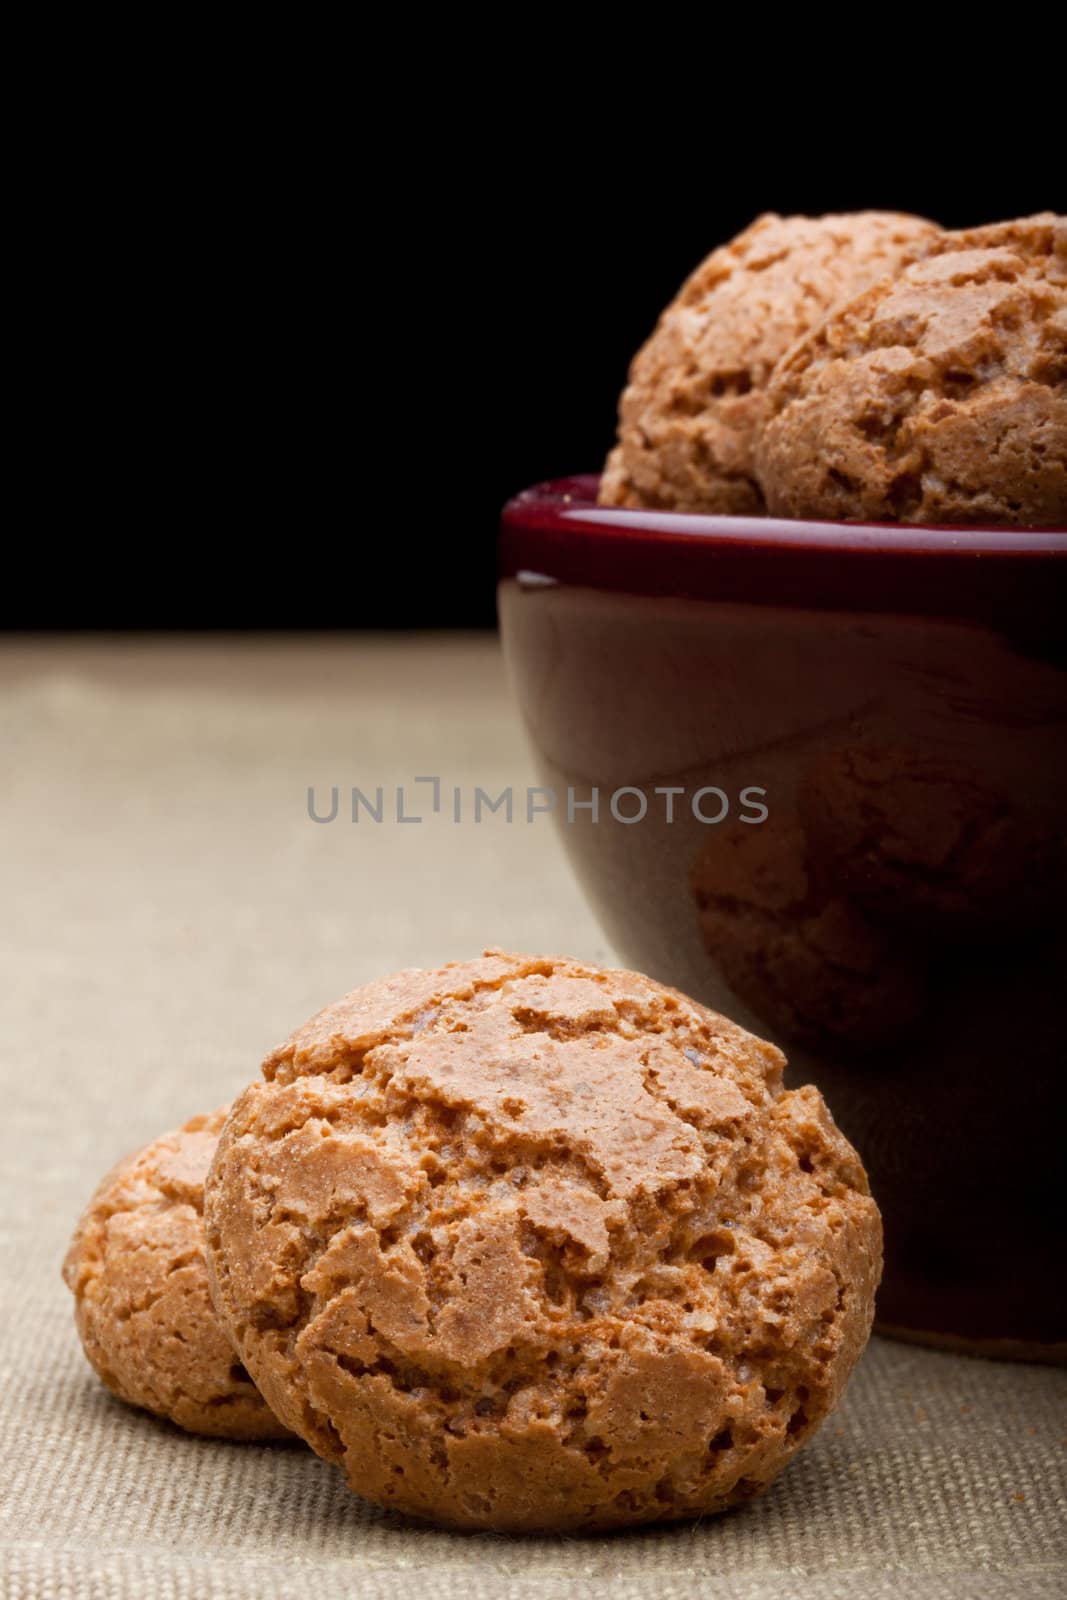 amaretti biscuits by maxg71